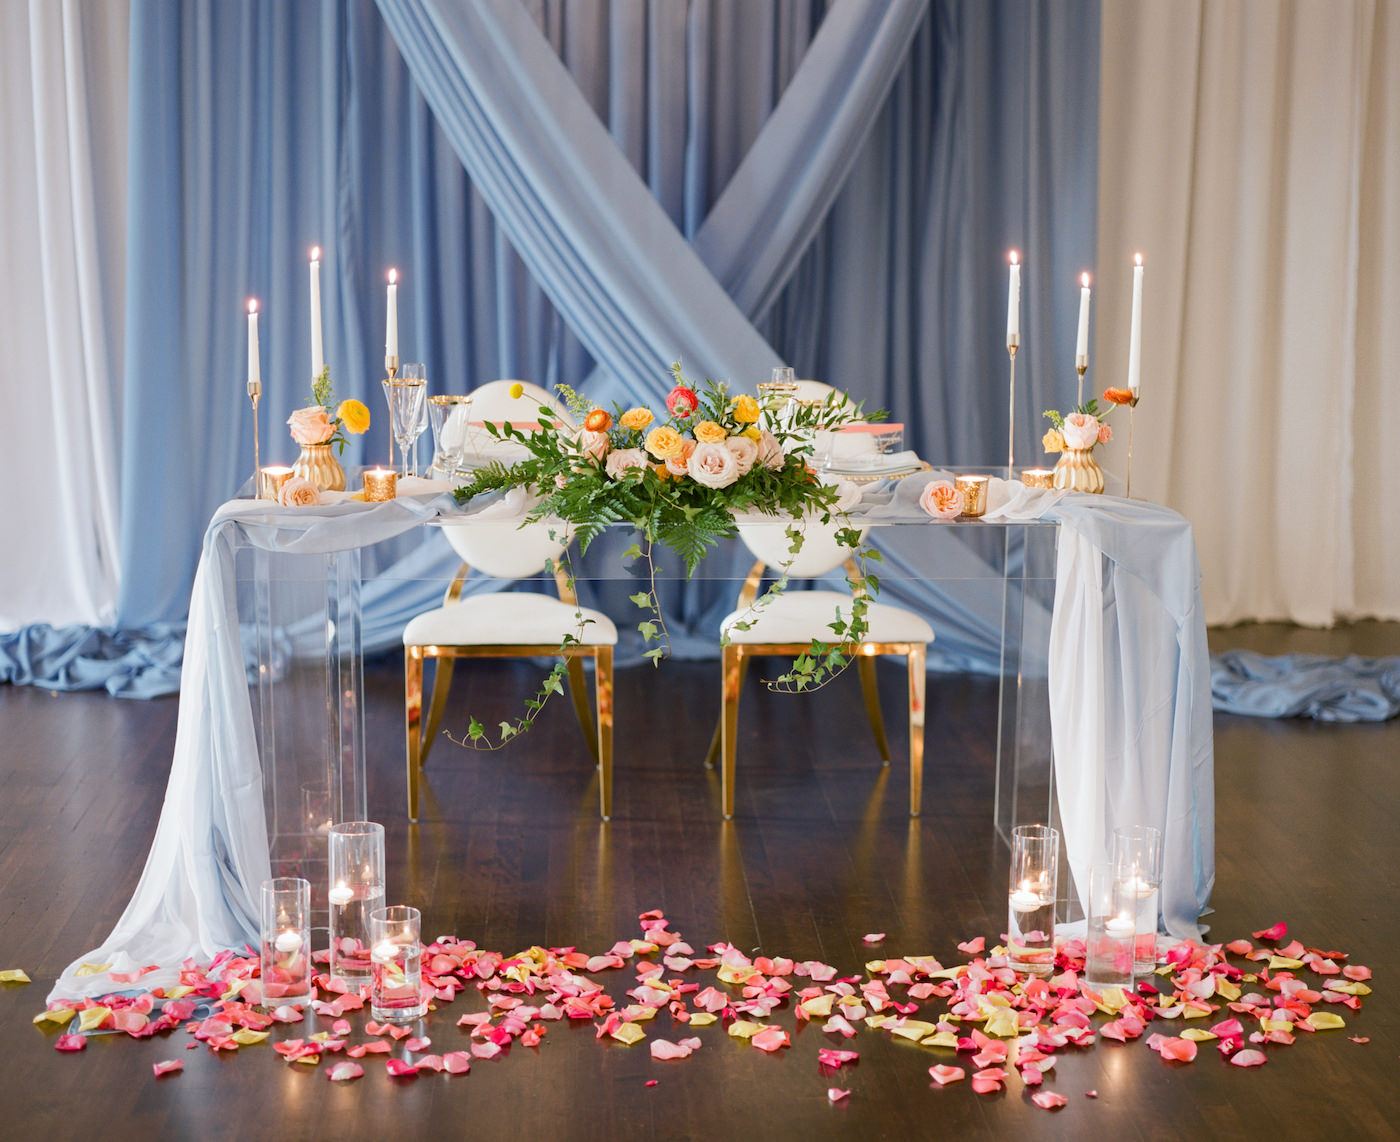 Romantic, Luxurious Wedding Reception and Decor, Sweetheart Table with Light Blue Linens, Acrylic Ghost Table, Gold Metal Chairs. Velvet Draping, Vibrant Pink and Yellow Petals, Peach, Orange, Pink and Red Florals with Greenery, Tall Taper Candles | Florida Wedding Planner Kelly Kennedy Weddings and Event | Kate Ryan Event Rentals